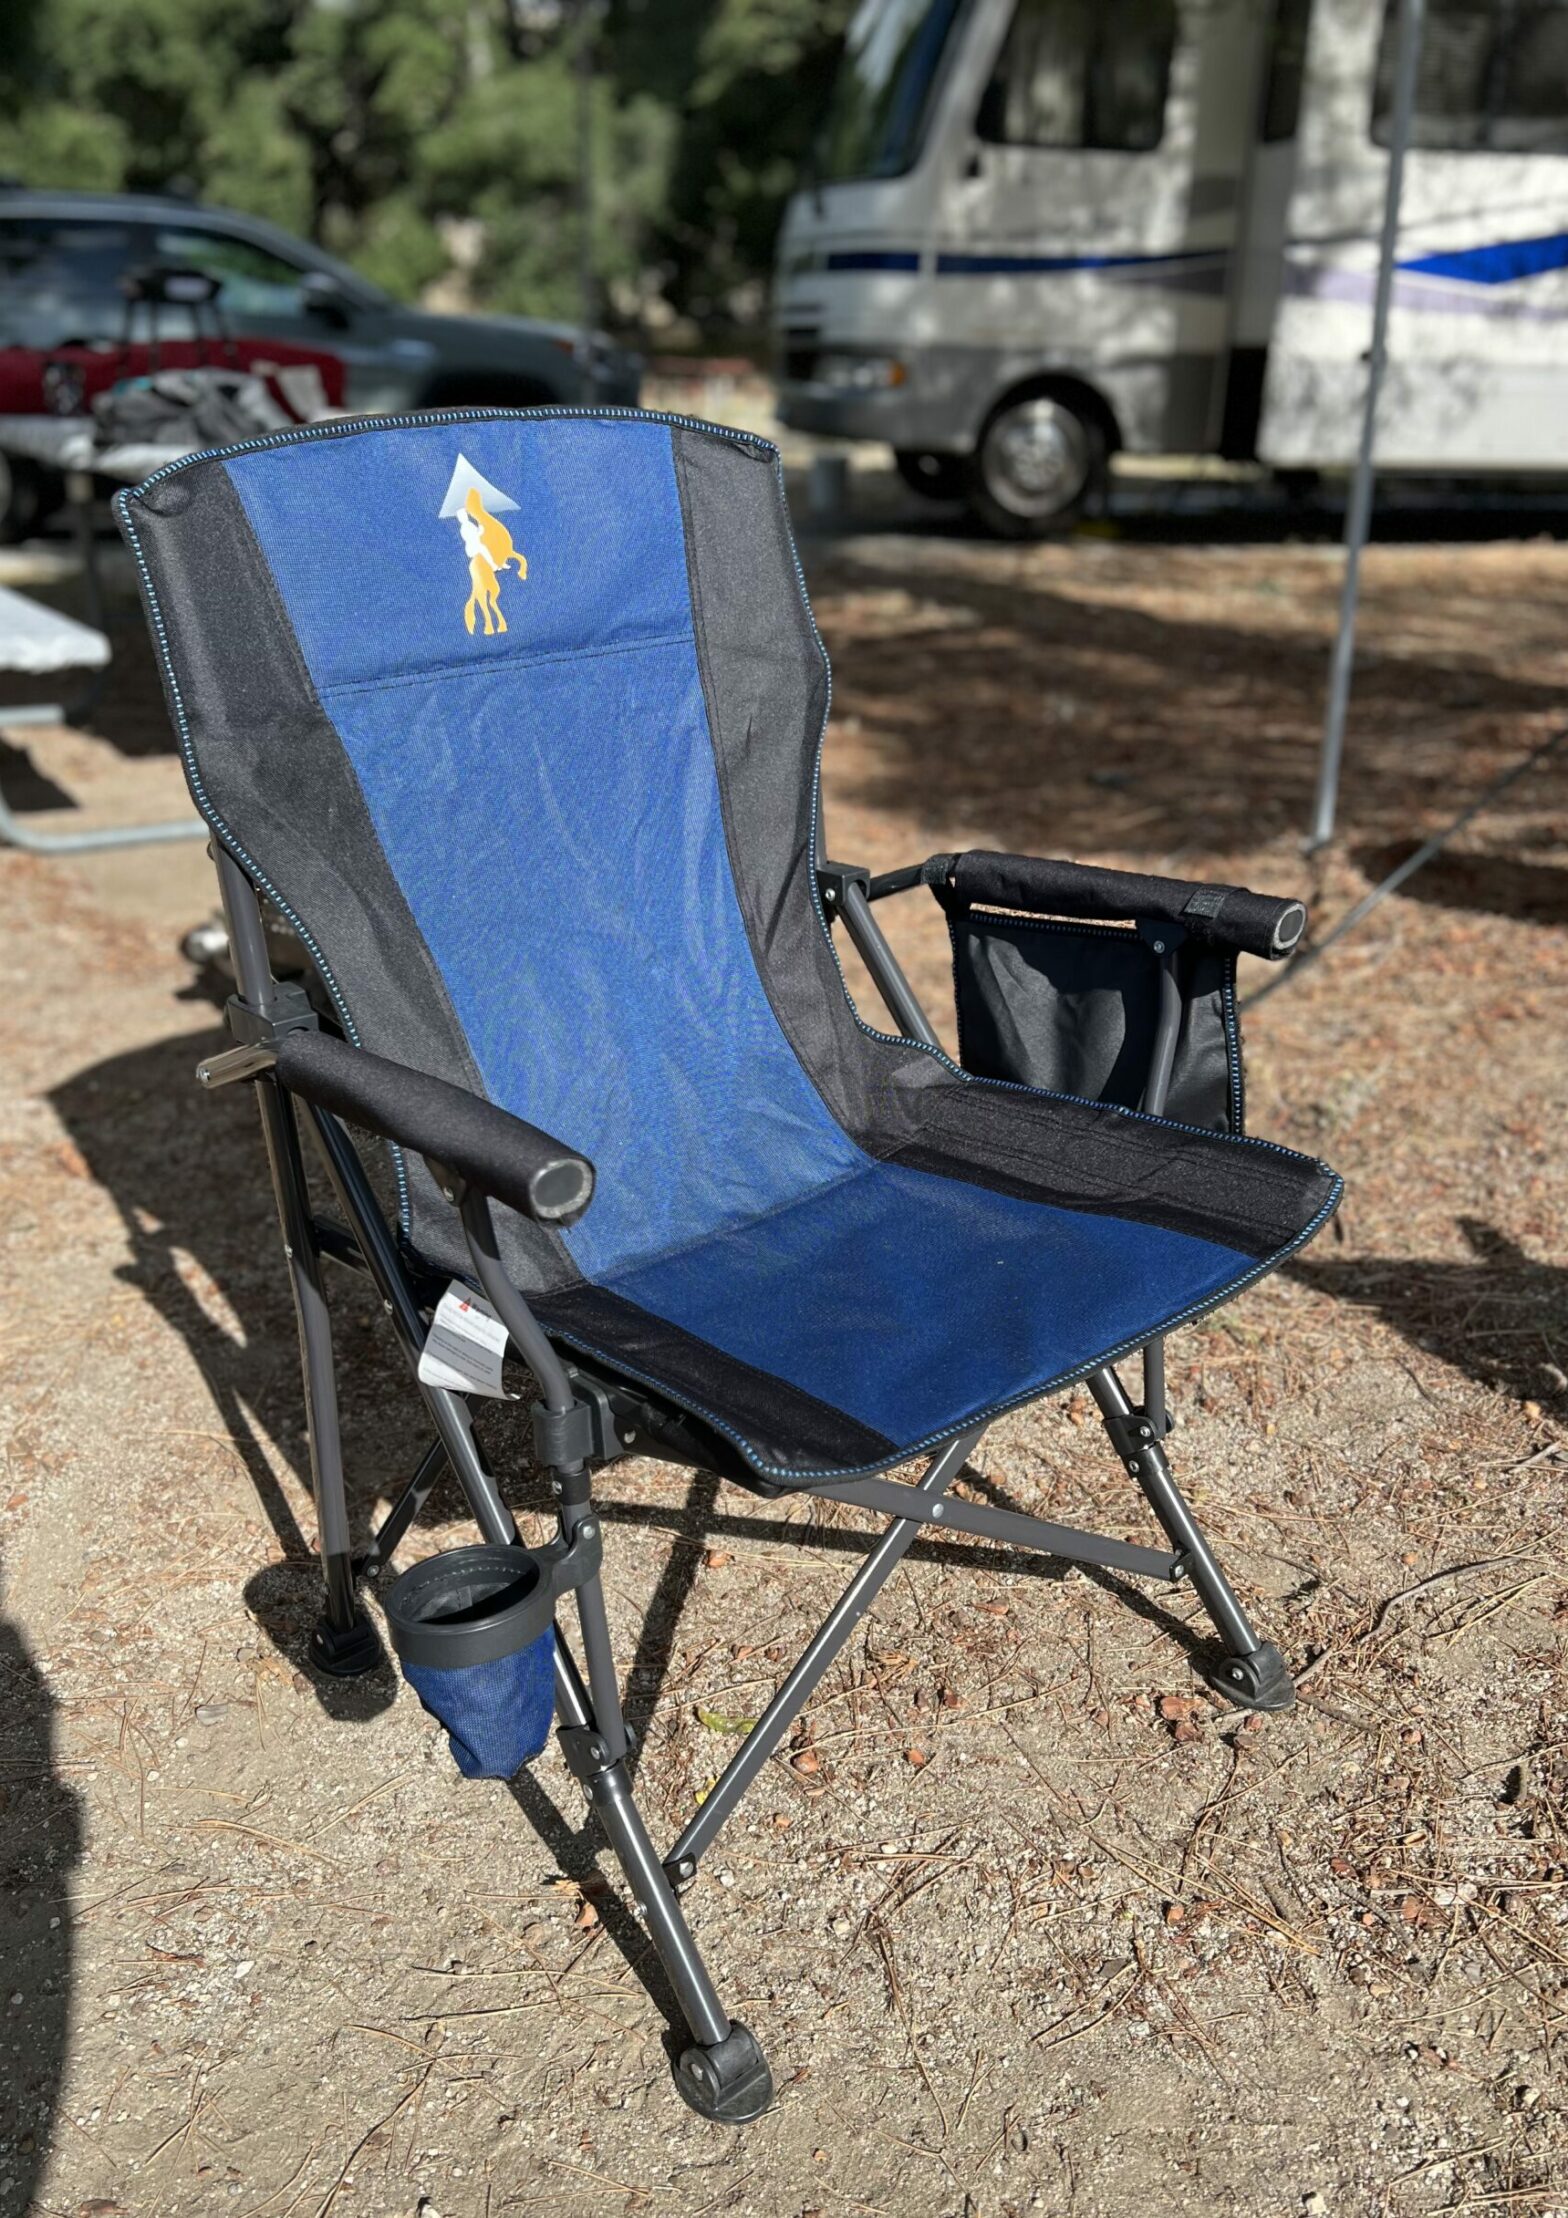 Foldable Camping Chair – Strong, Comfortable, Portable & Lightweight